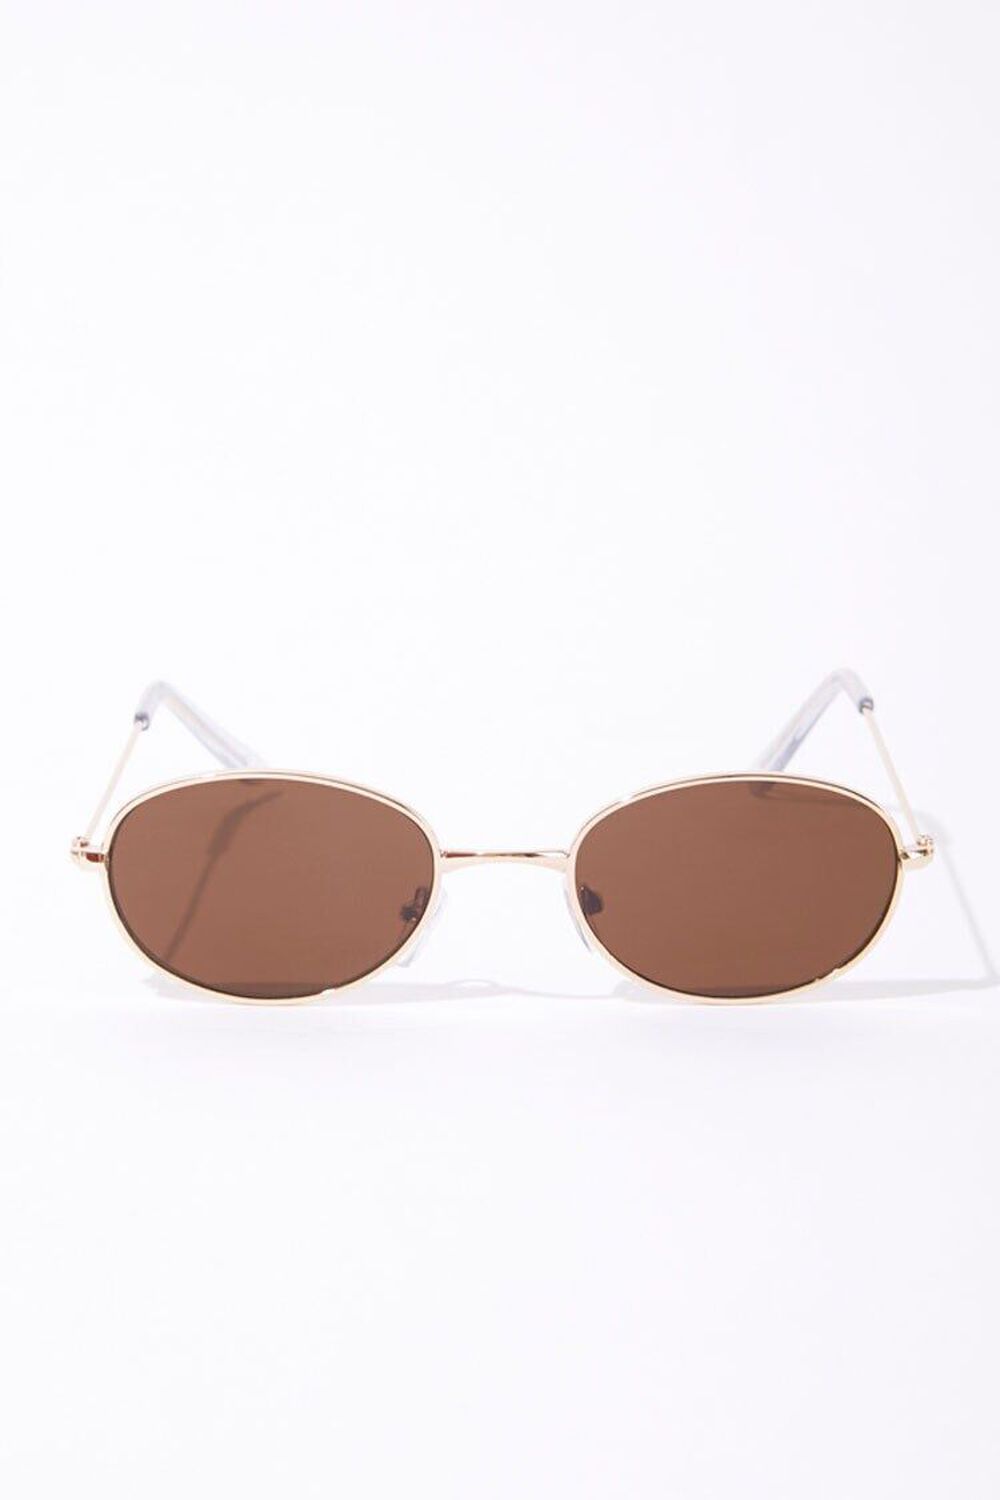 GOLD/BROWN Oval Tinted Sunglasses, image 1